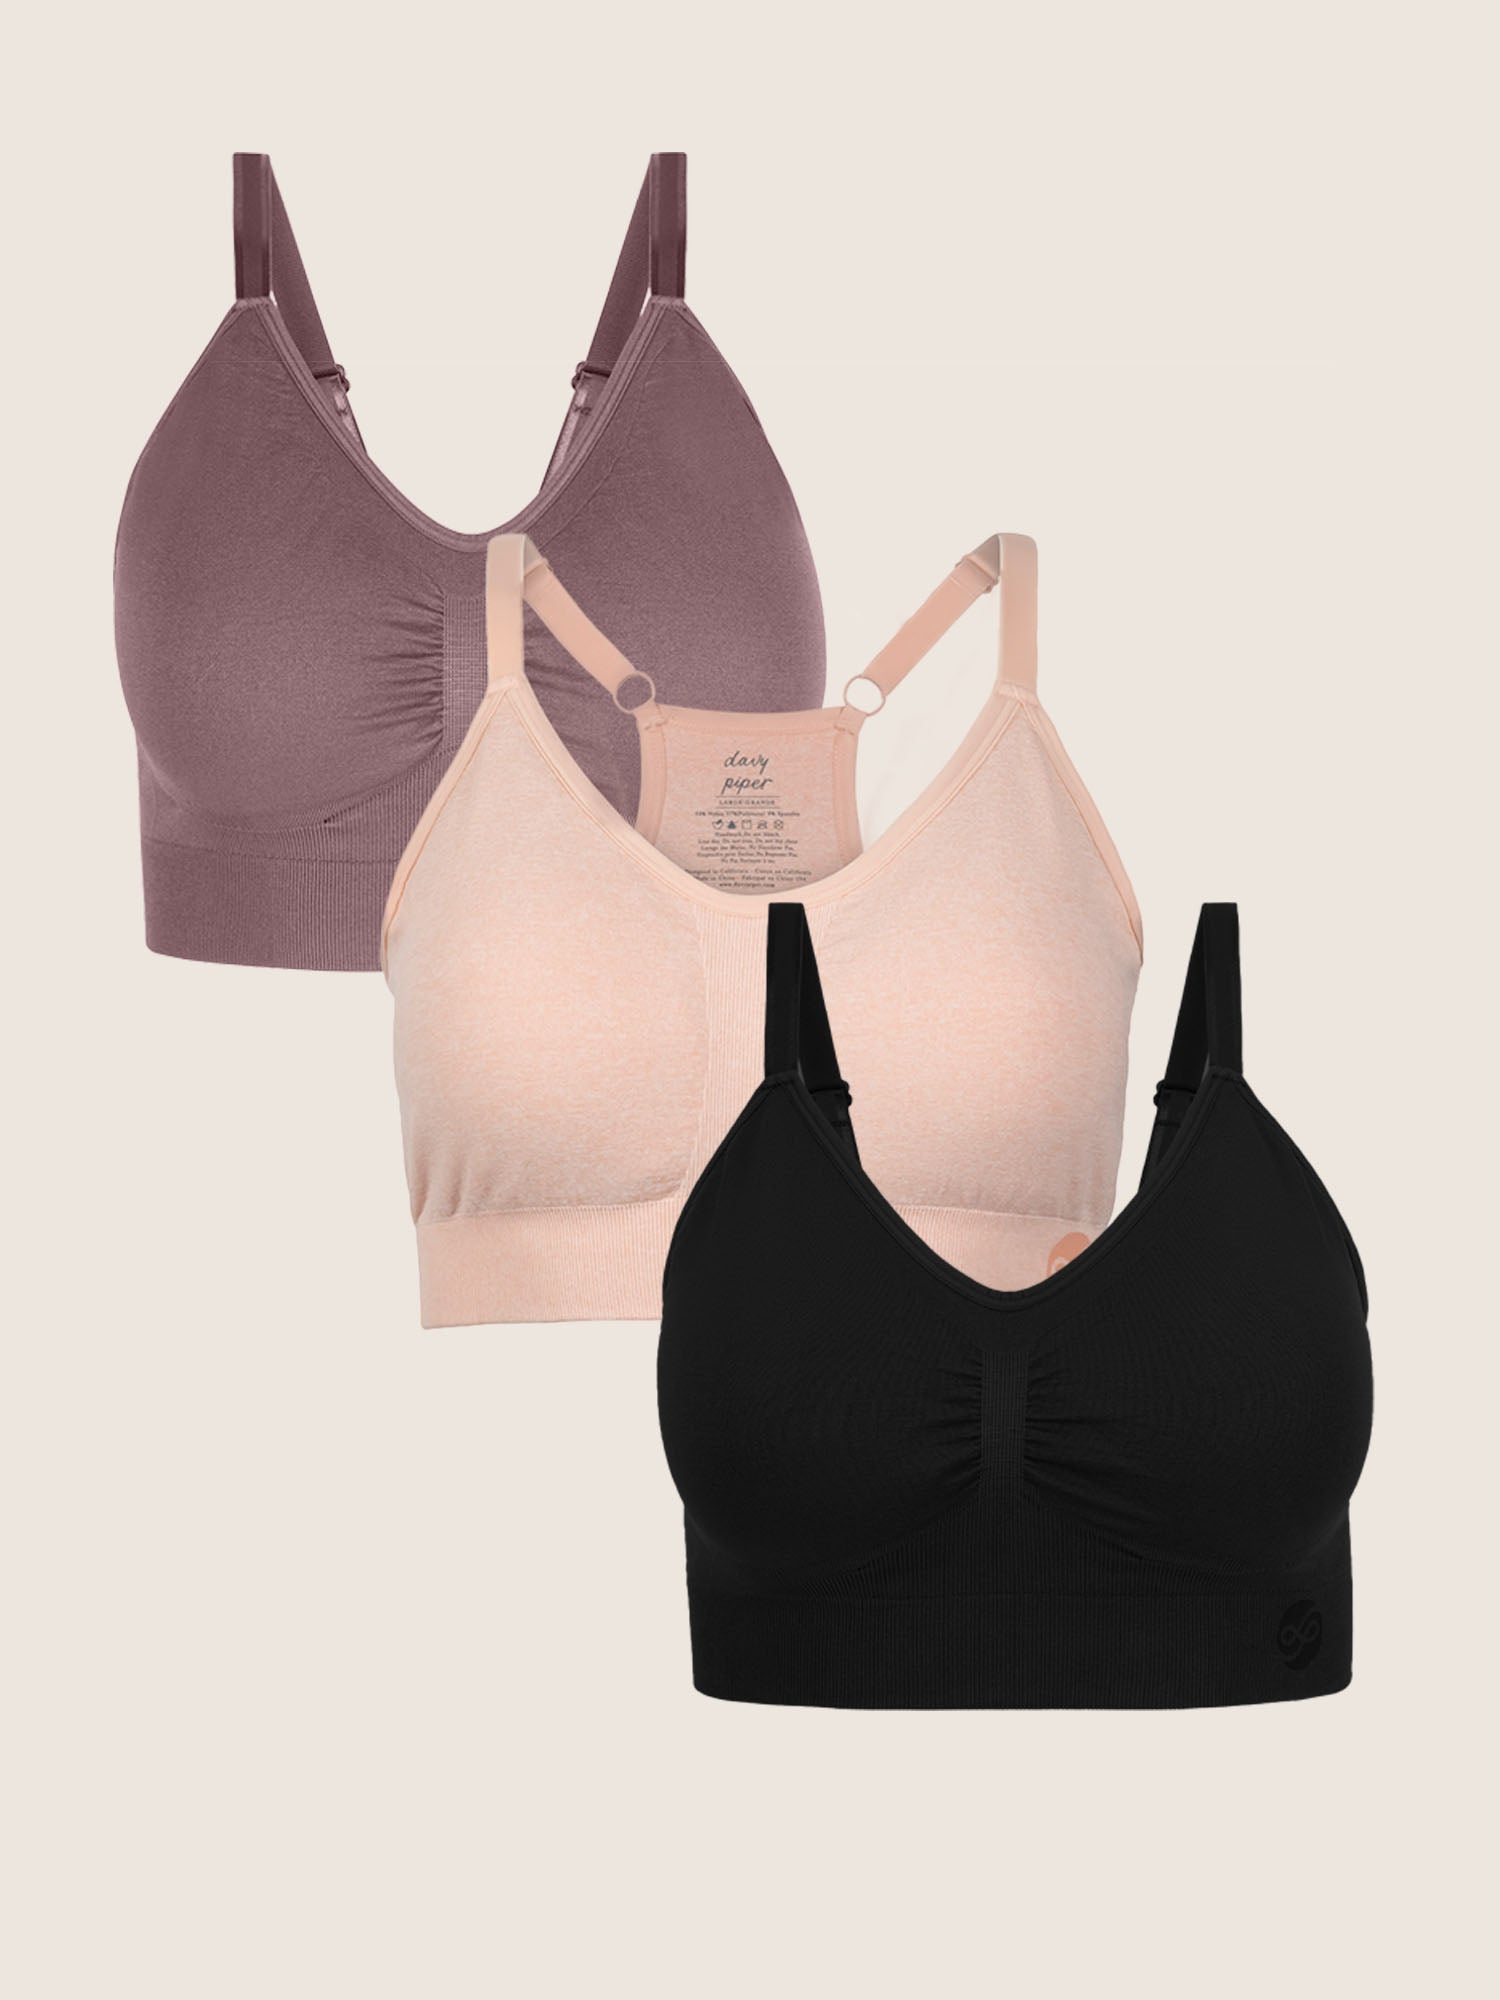 2pk Ultimate Support Non-Wired Sports Bras A-H